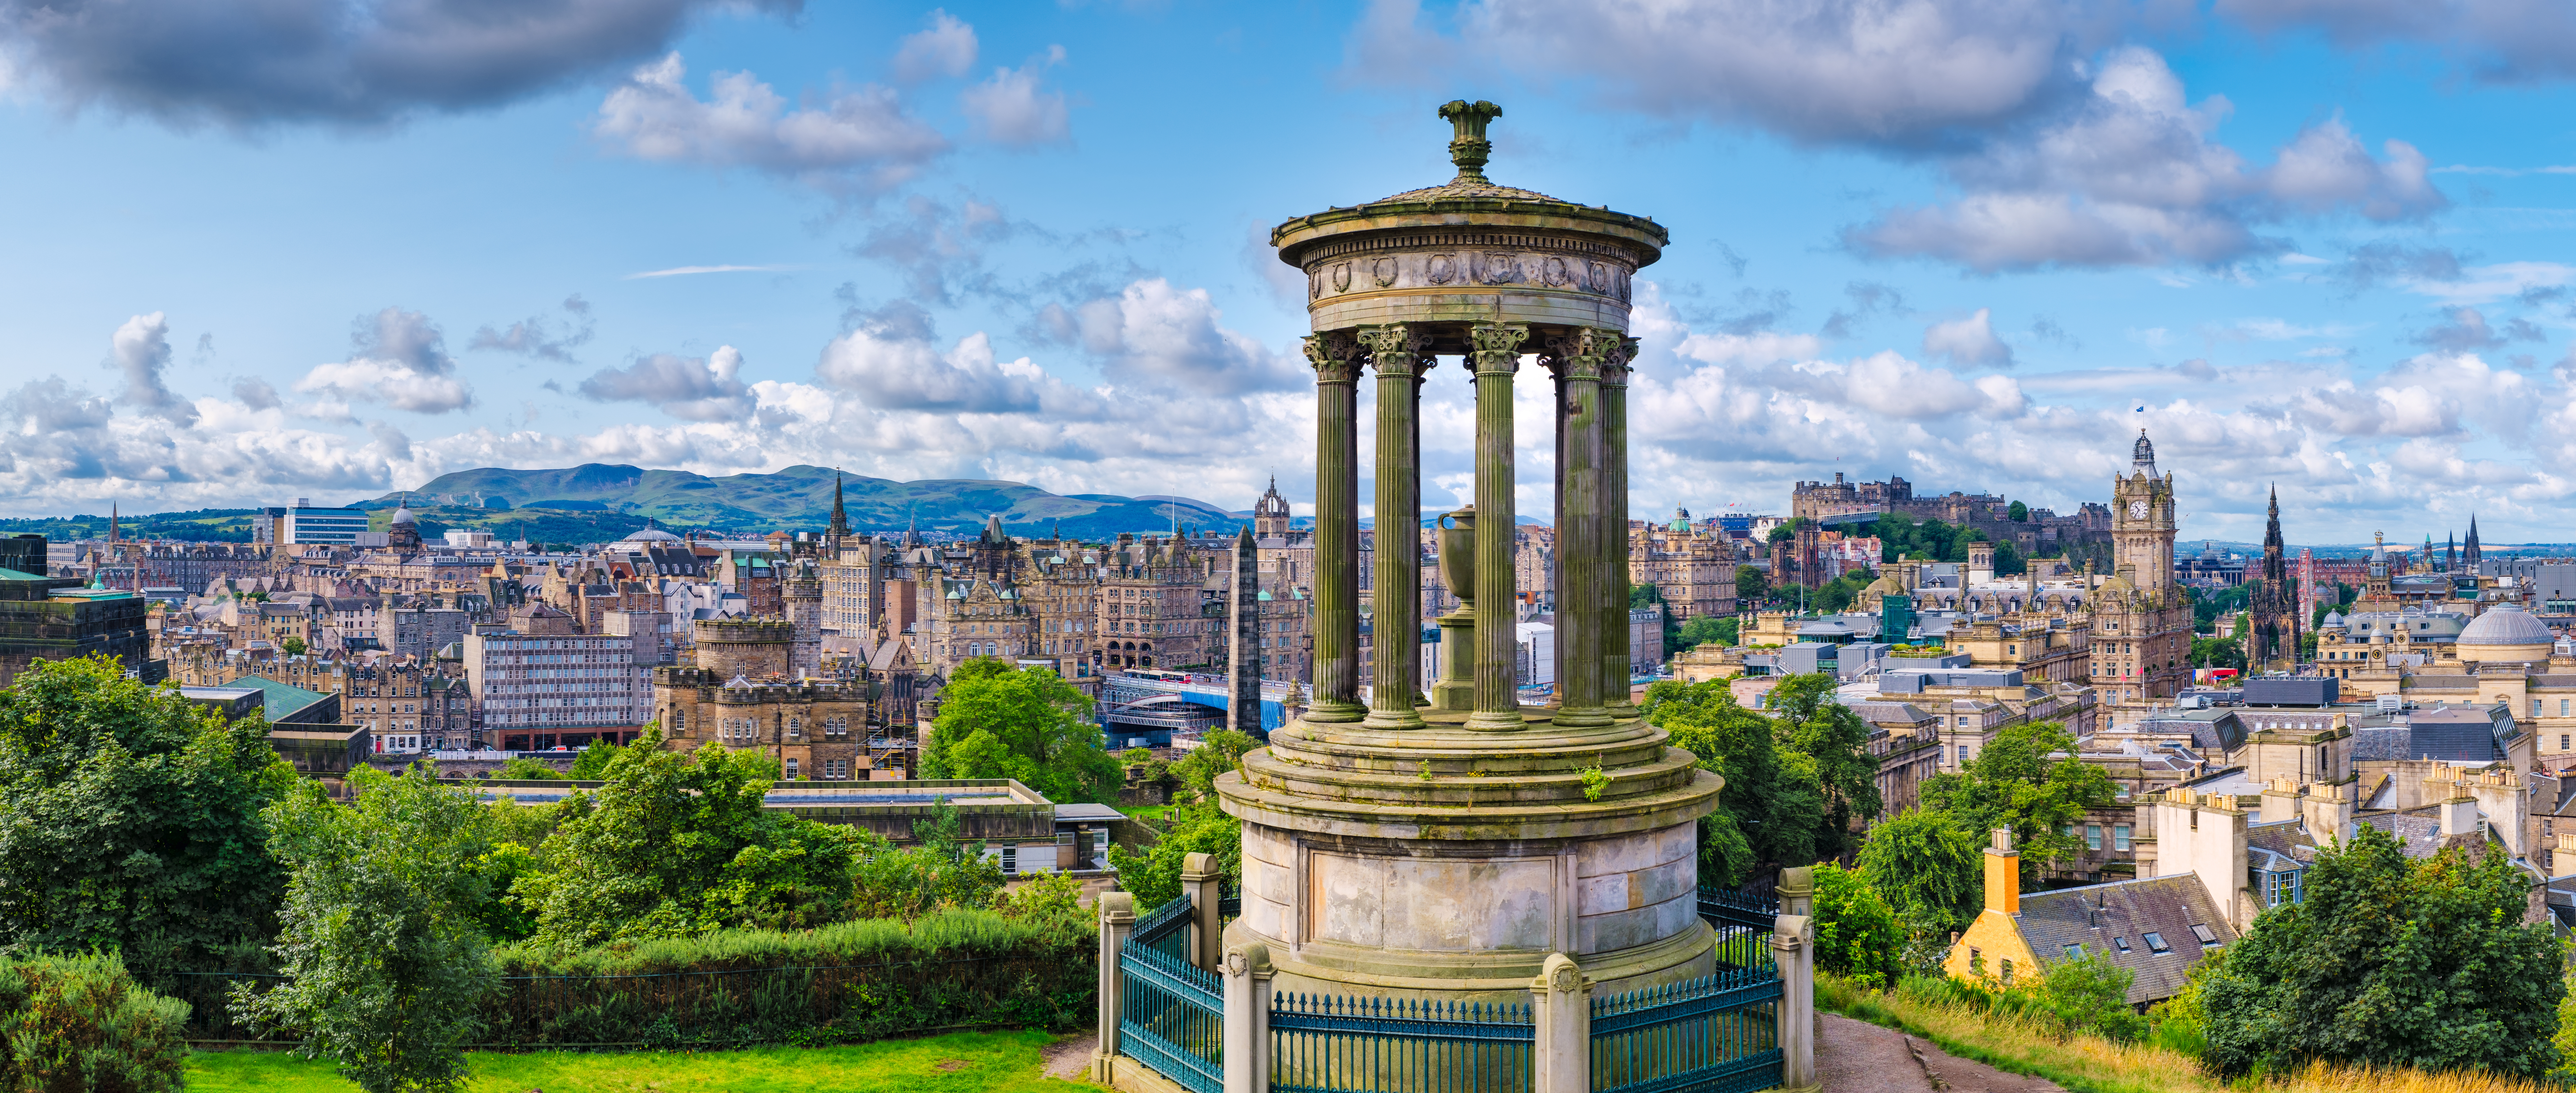 How to spend a day in Edinburgh